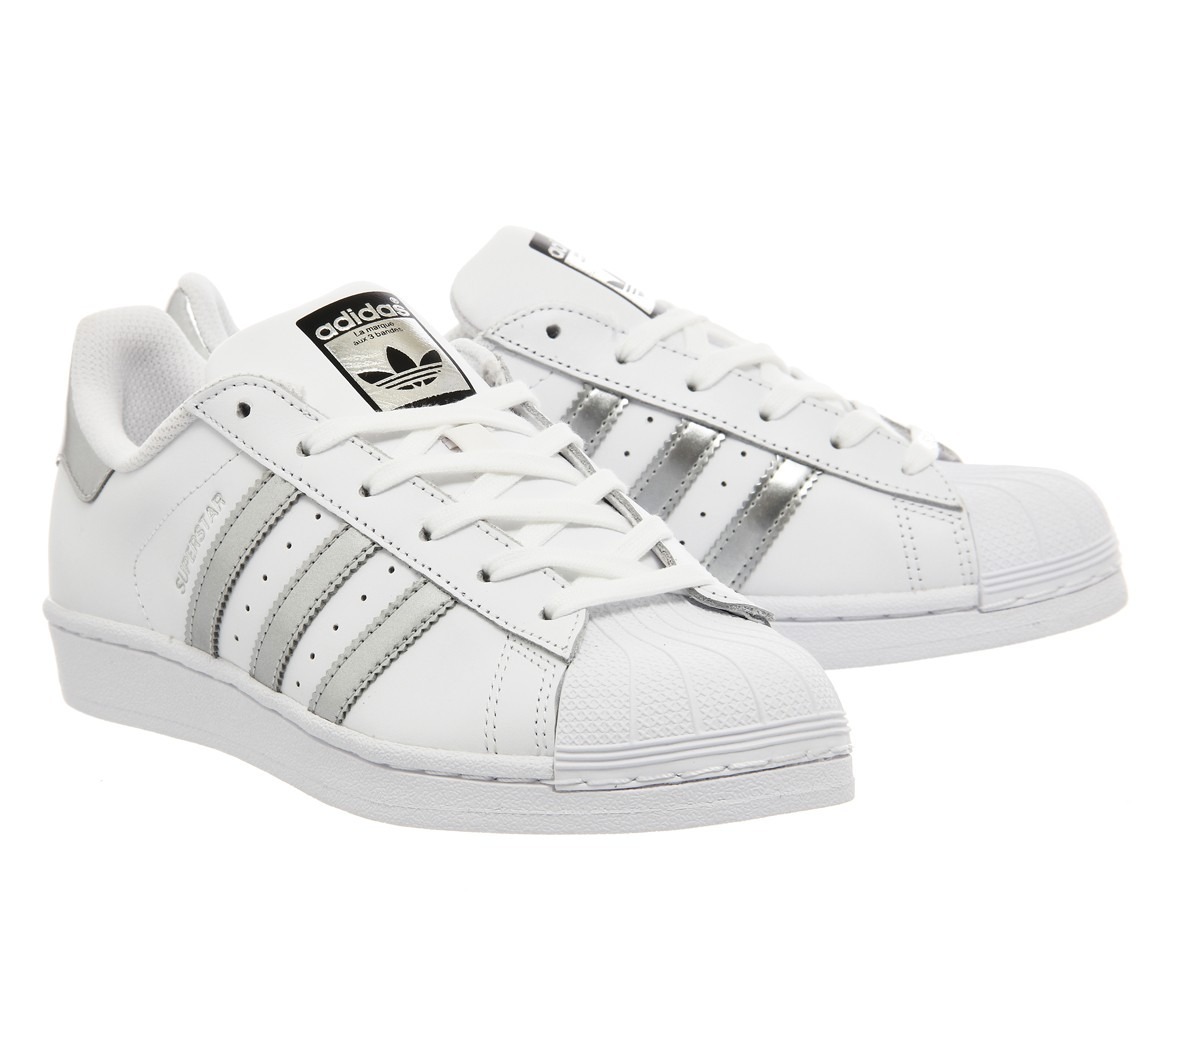 Adidas Superstar Plateadas Online Hotsell, UP TO 62% OFF |  www.istruzionepotenza.it